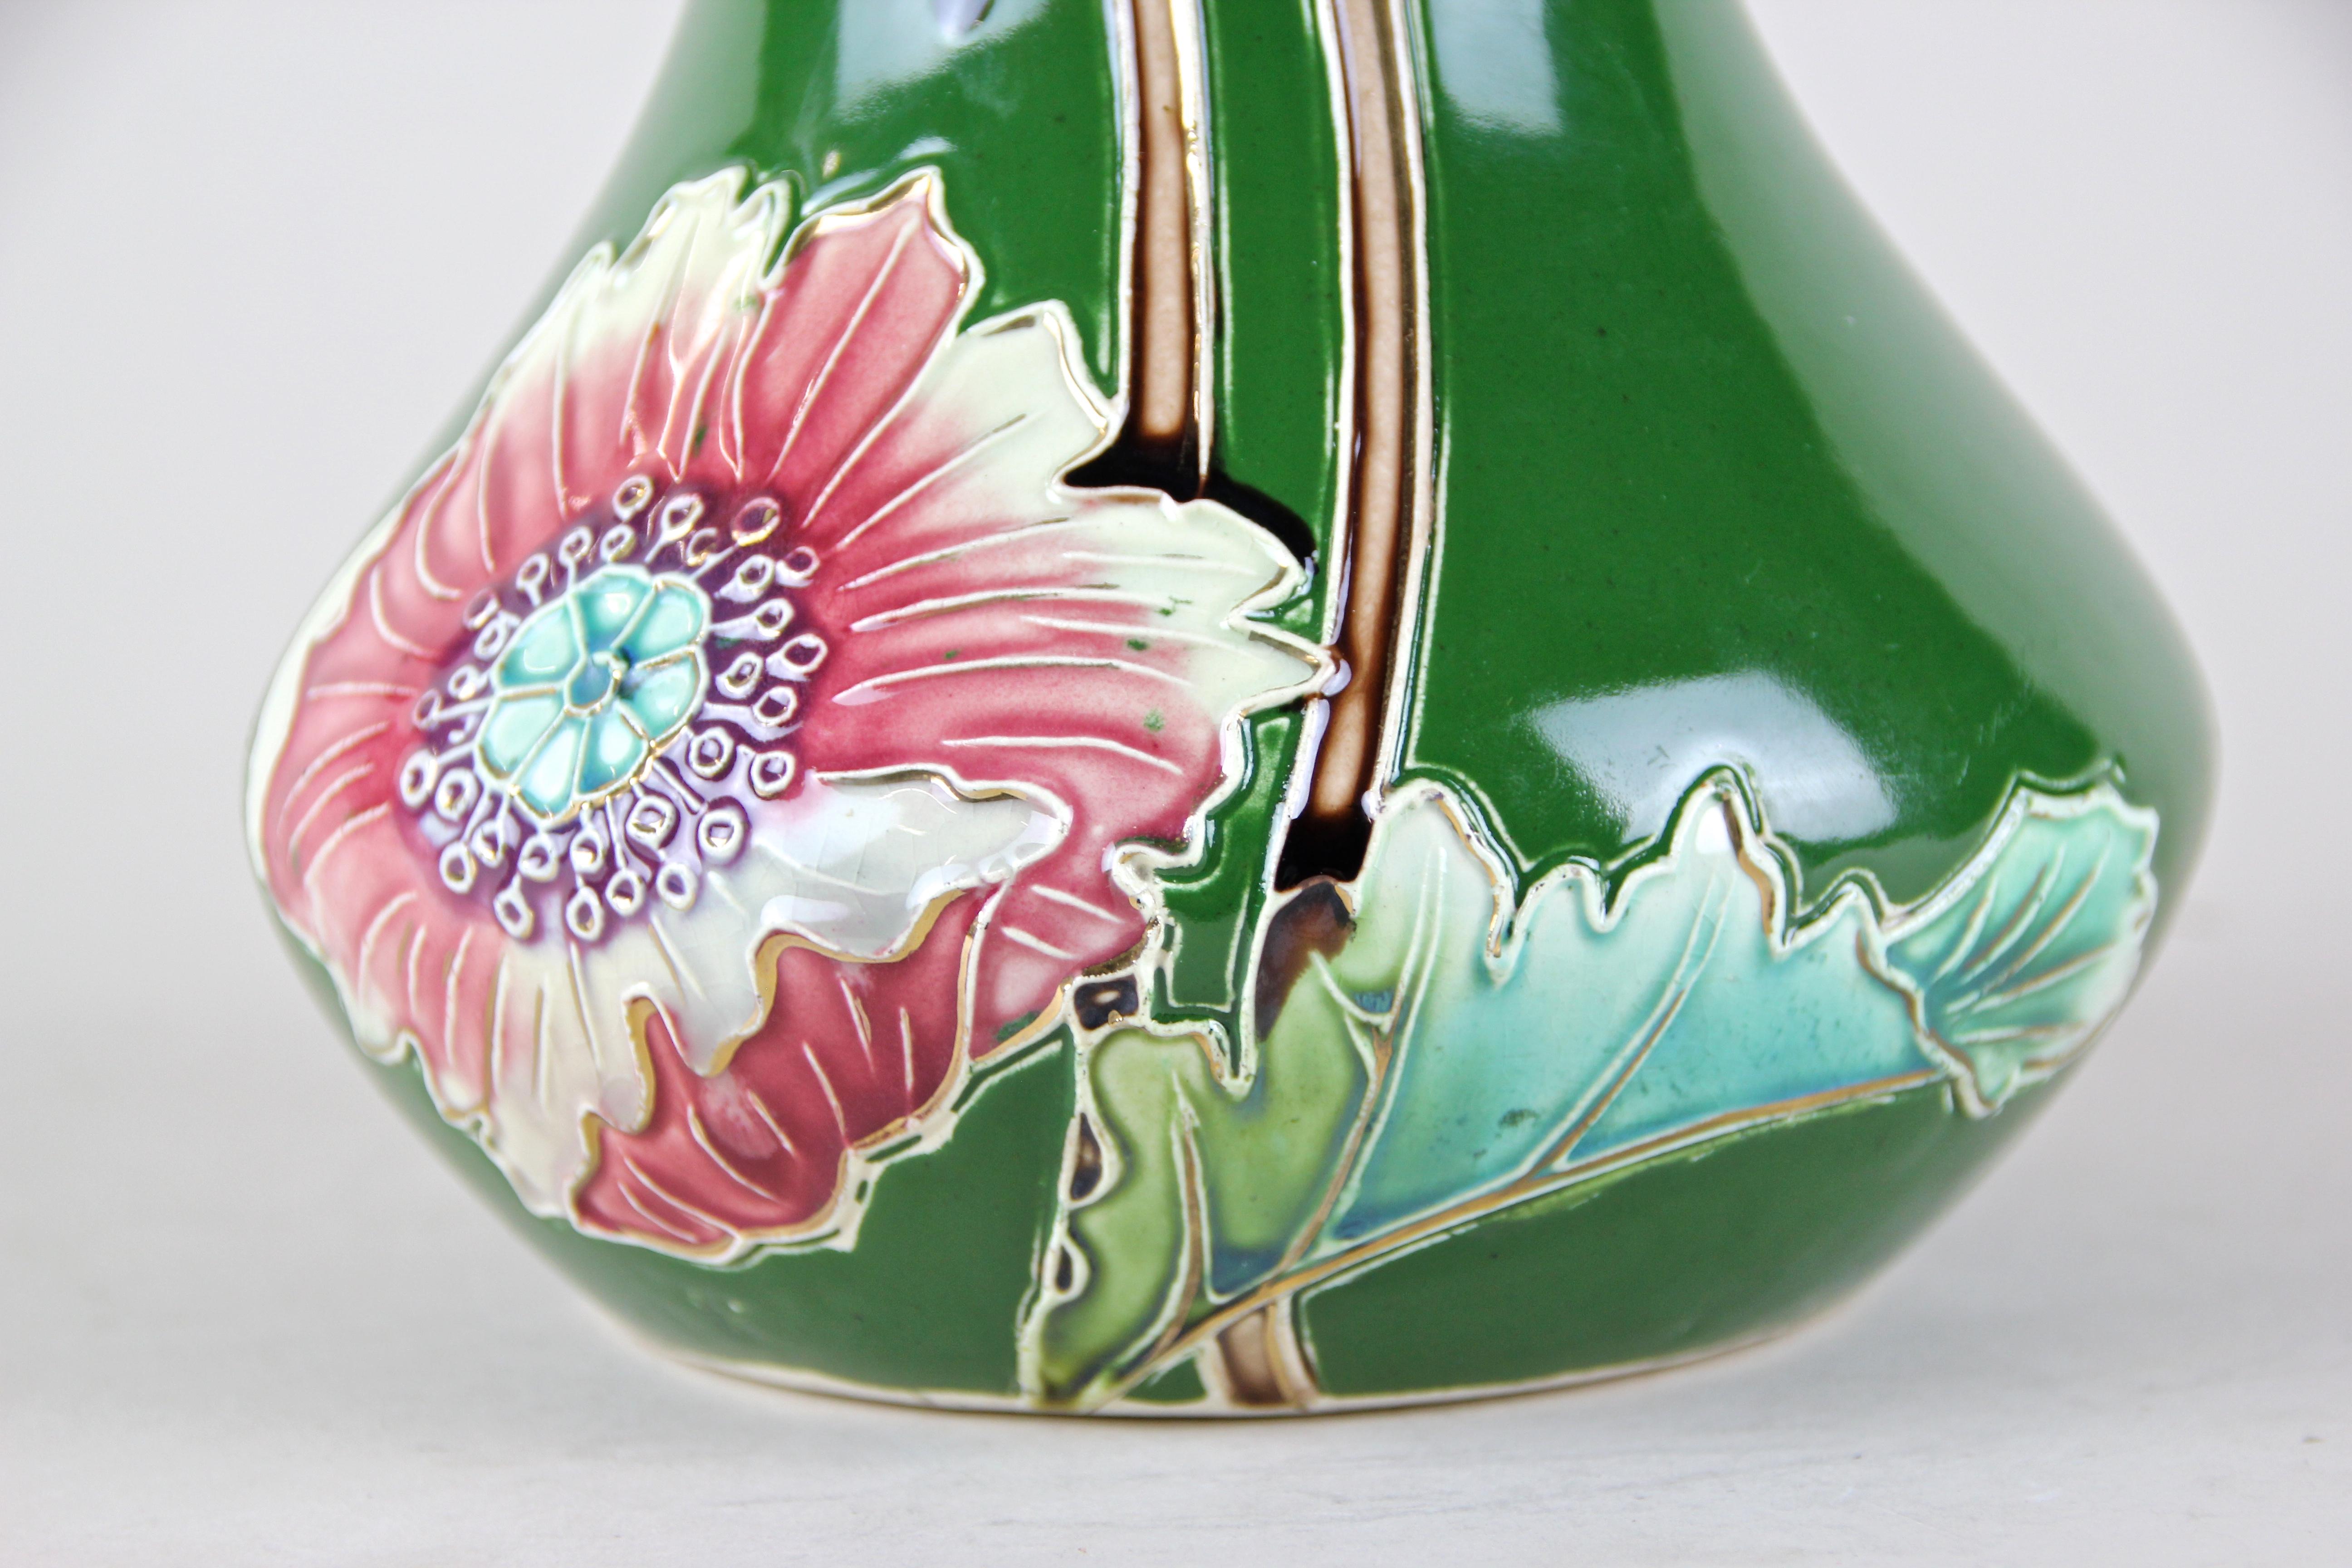 Lovely Art Nouveau vase by Bernhard De Bruyne, France, circa 1910. The wonderful shaped body colored in a beautiful green shows a fantastic floral design with three big blossoms on one side and two on the other. An eye-catching Art Nouveau Vase for